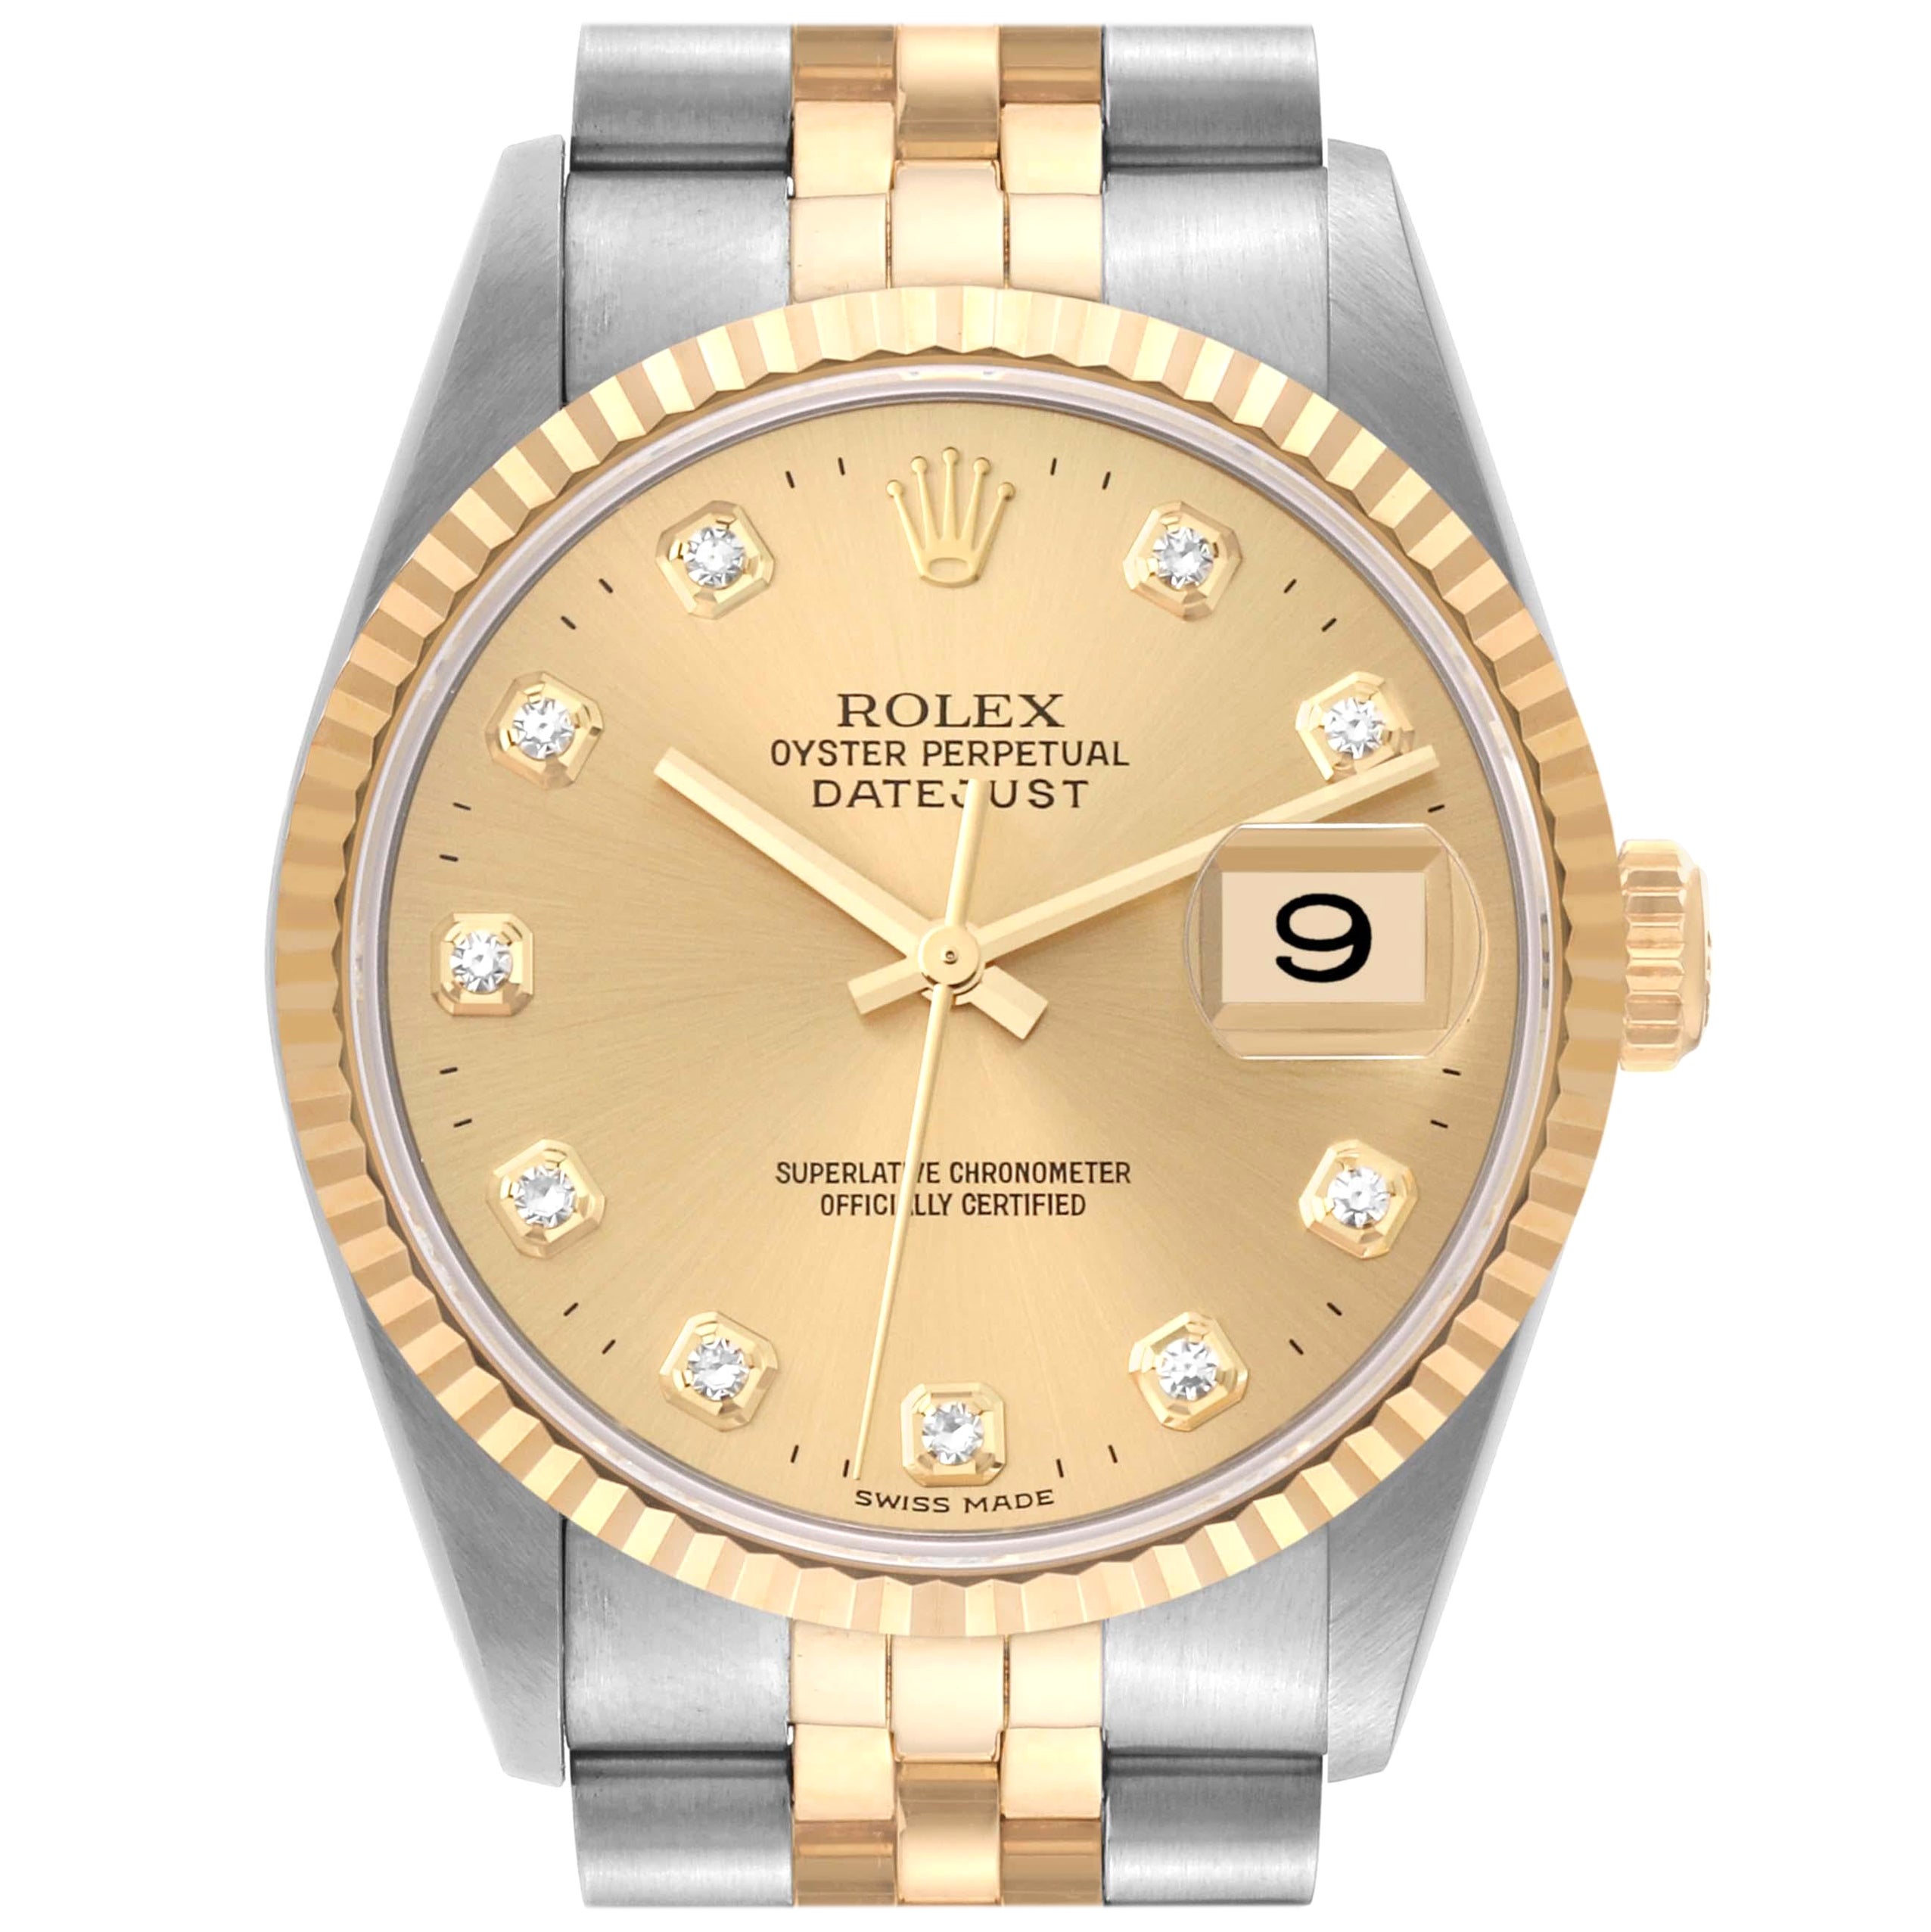 What should I know before buying a Rolex?